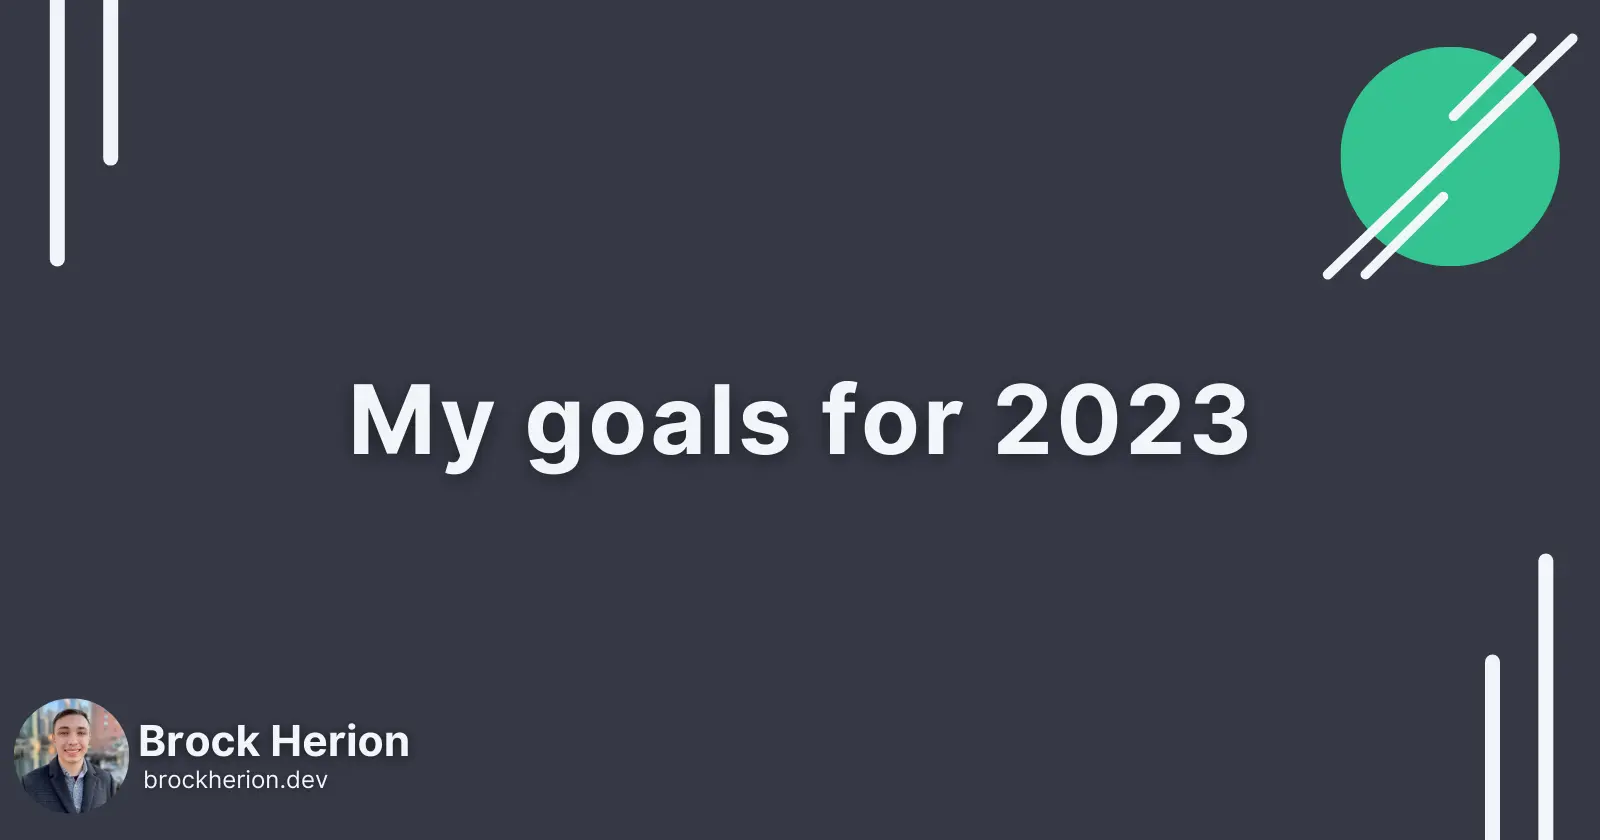 My goals for 2023